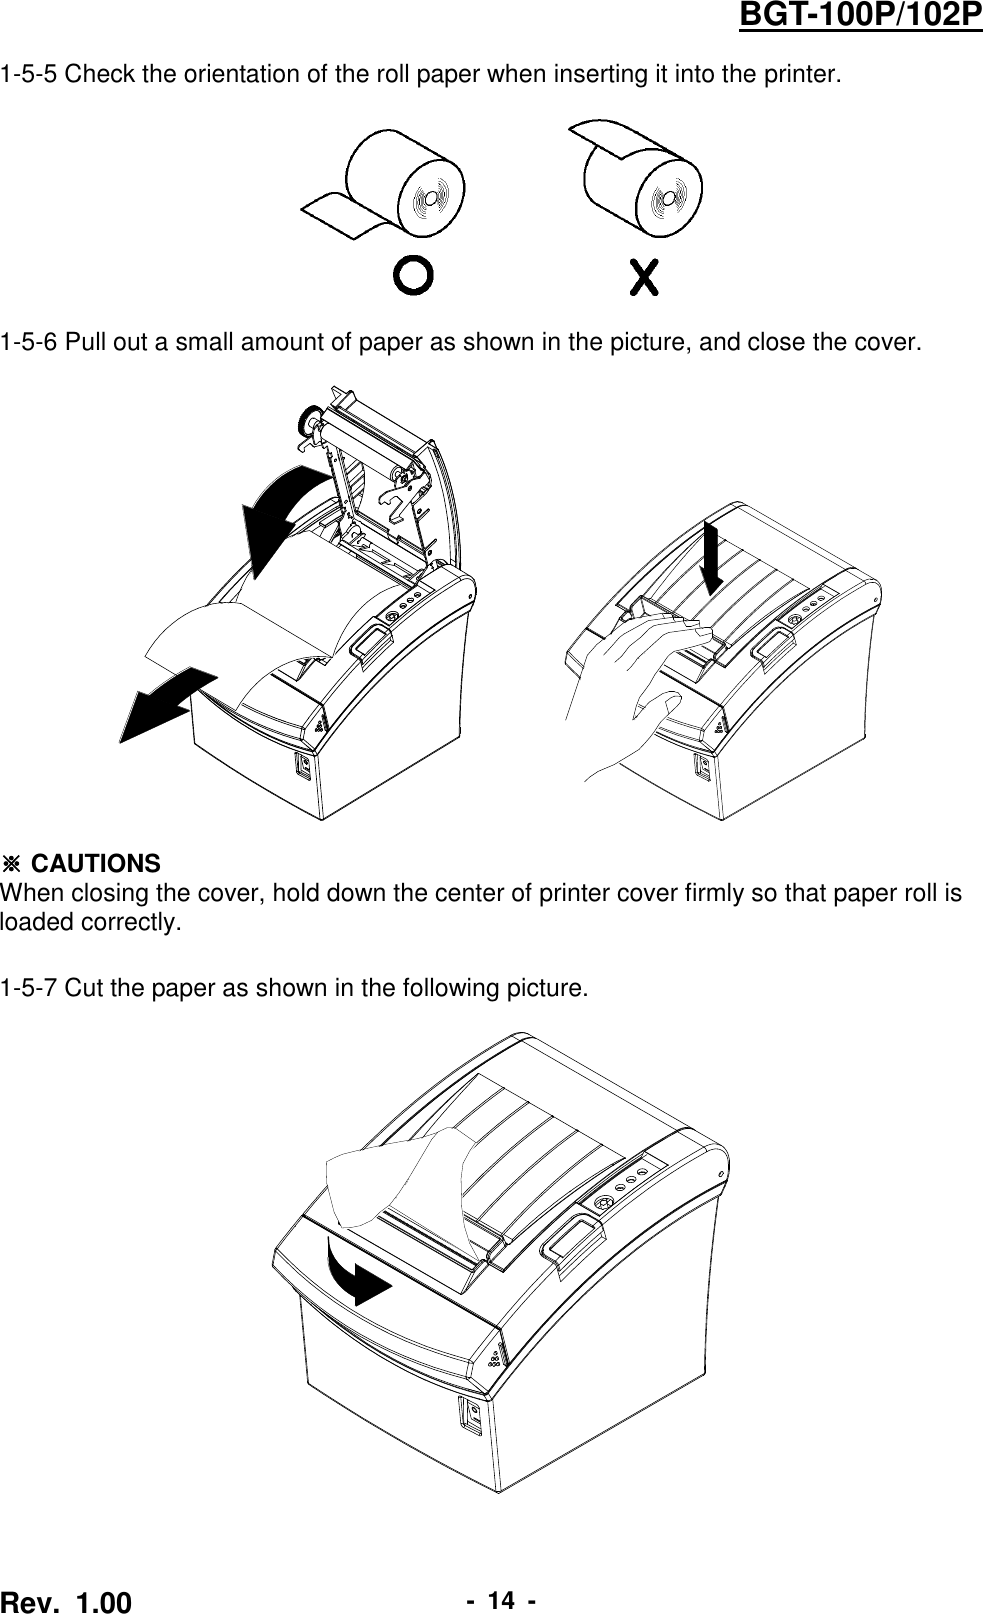  Rev.  1.00 -  14  - BGT-100P/102P 1-5-5 Check the orientation of the roll paper when inserting it into the printer.    1-5-6 Pull out a small amount of paper as shown in the picture, and close the cover.            ※ CAUTIONS When closing the cover, hold down the center of printer cover firmly so that paper roll is loaded correctly.  1-5-7 Cut the paper as shown in the following picture.     